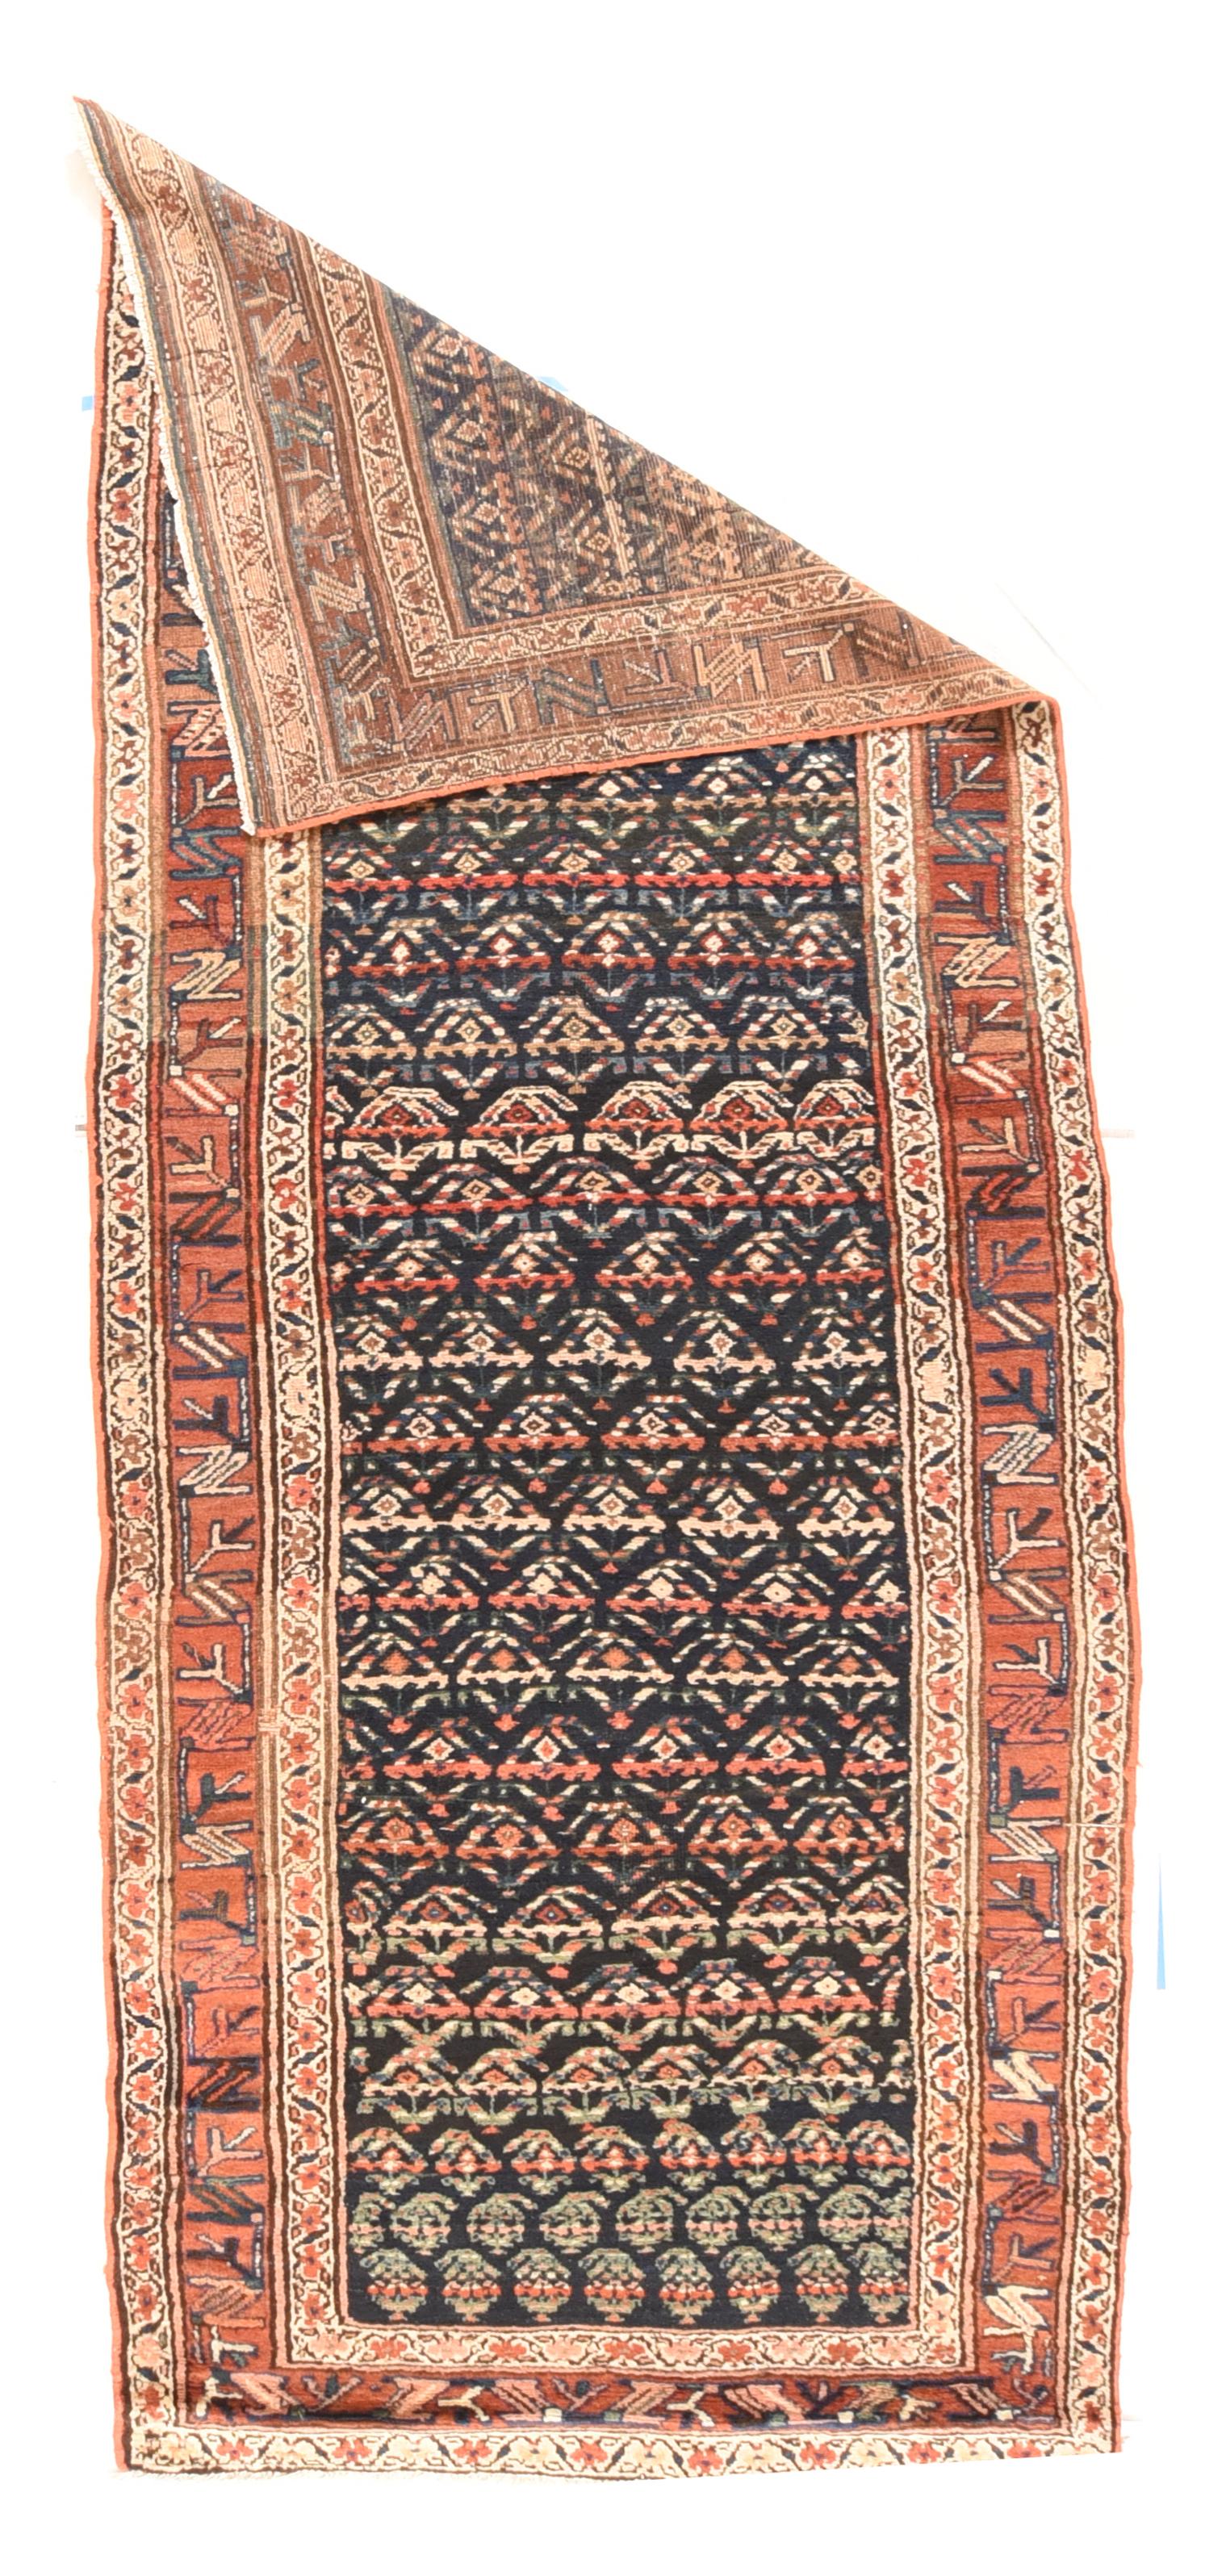 Antique Tribal N.W Persian Rug 3'8'' x 11'. The row-reversing botehs grow in size while decreasing in number on the dark blue indigo field, with accents in: rust-rose, sand, red and green. The botehs are arrayed in close, half-drop, offset rows with